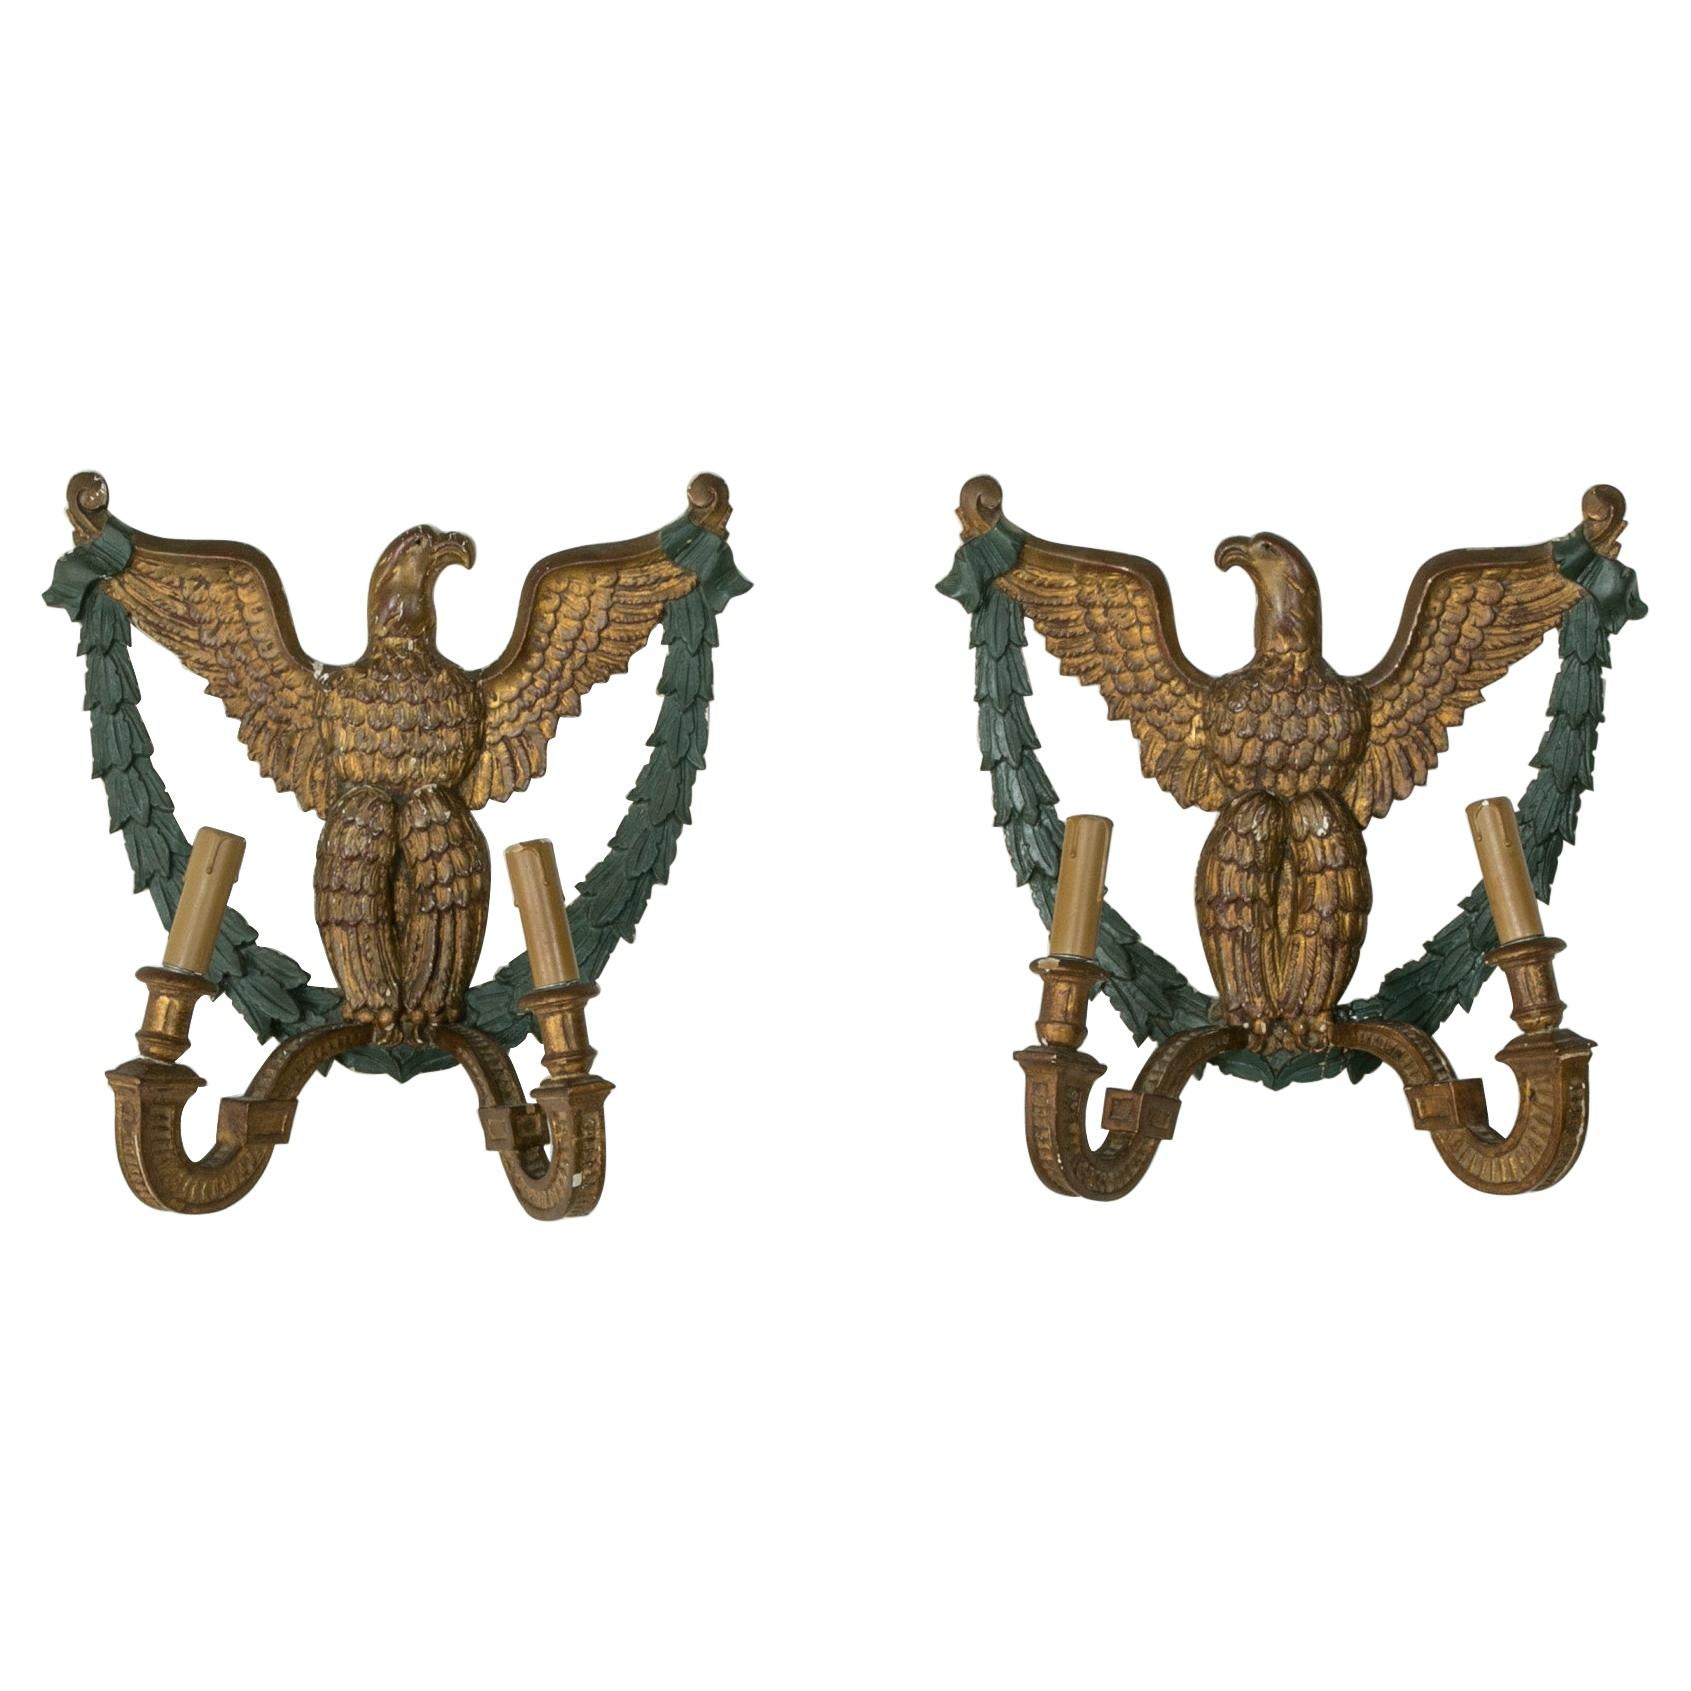 Pair of French Empire Style Gilt Wood Sconces with Eagles, Circa 1900